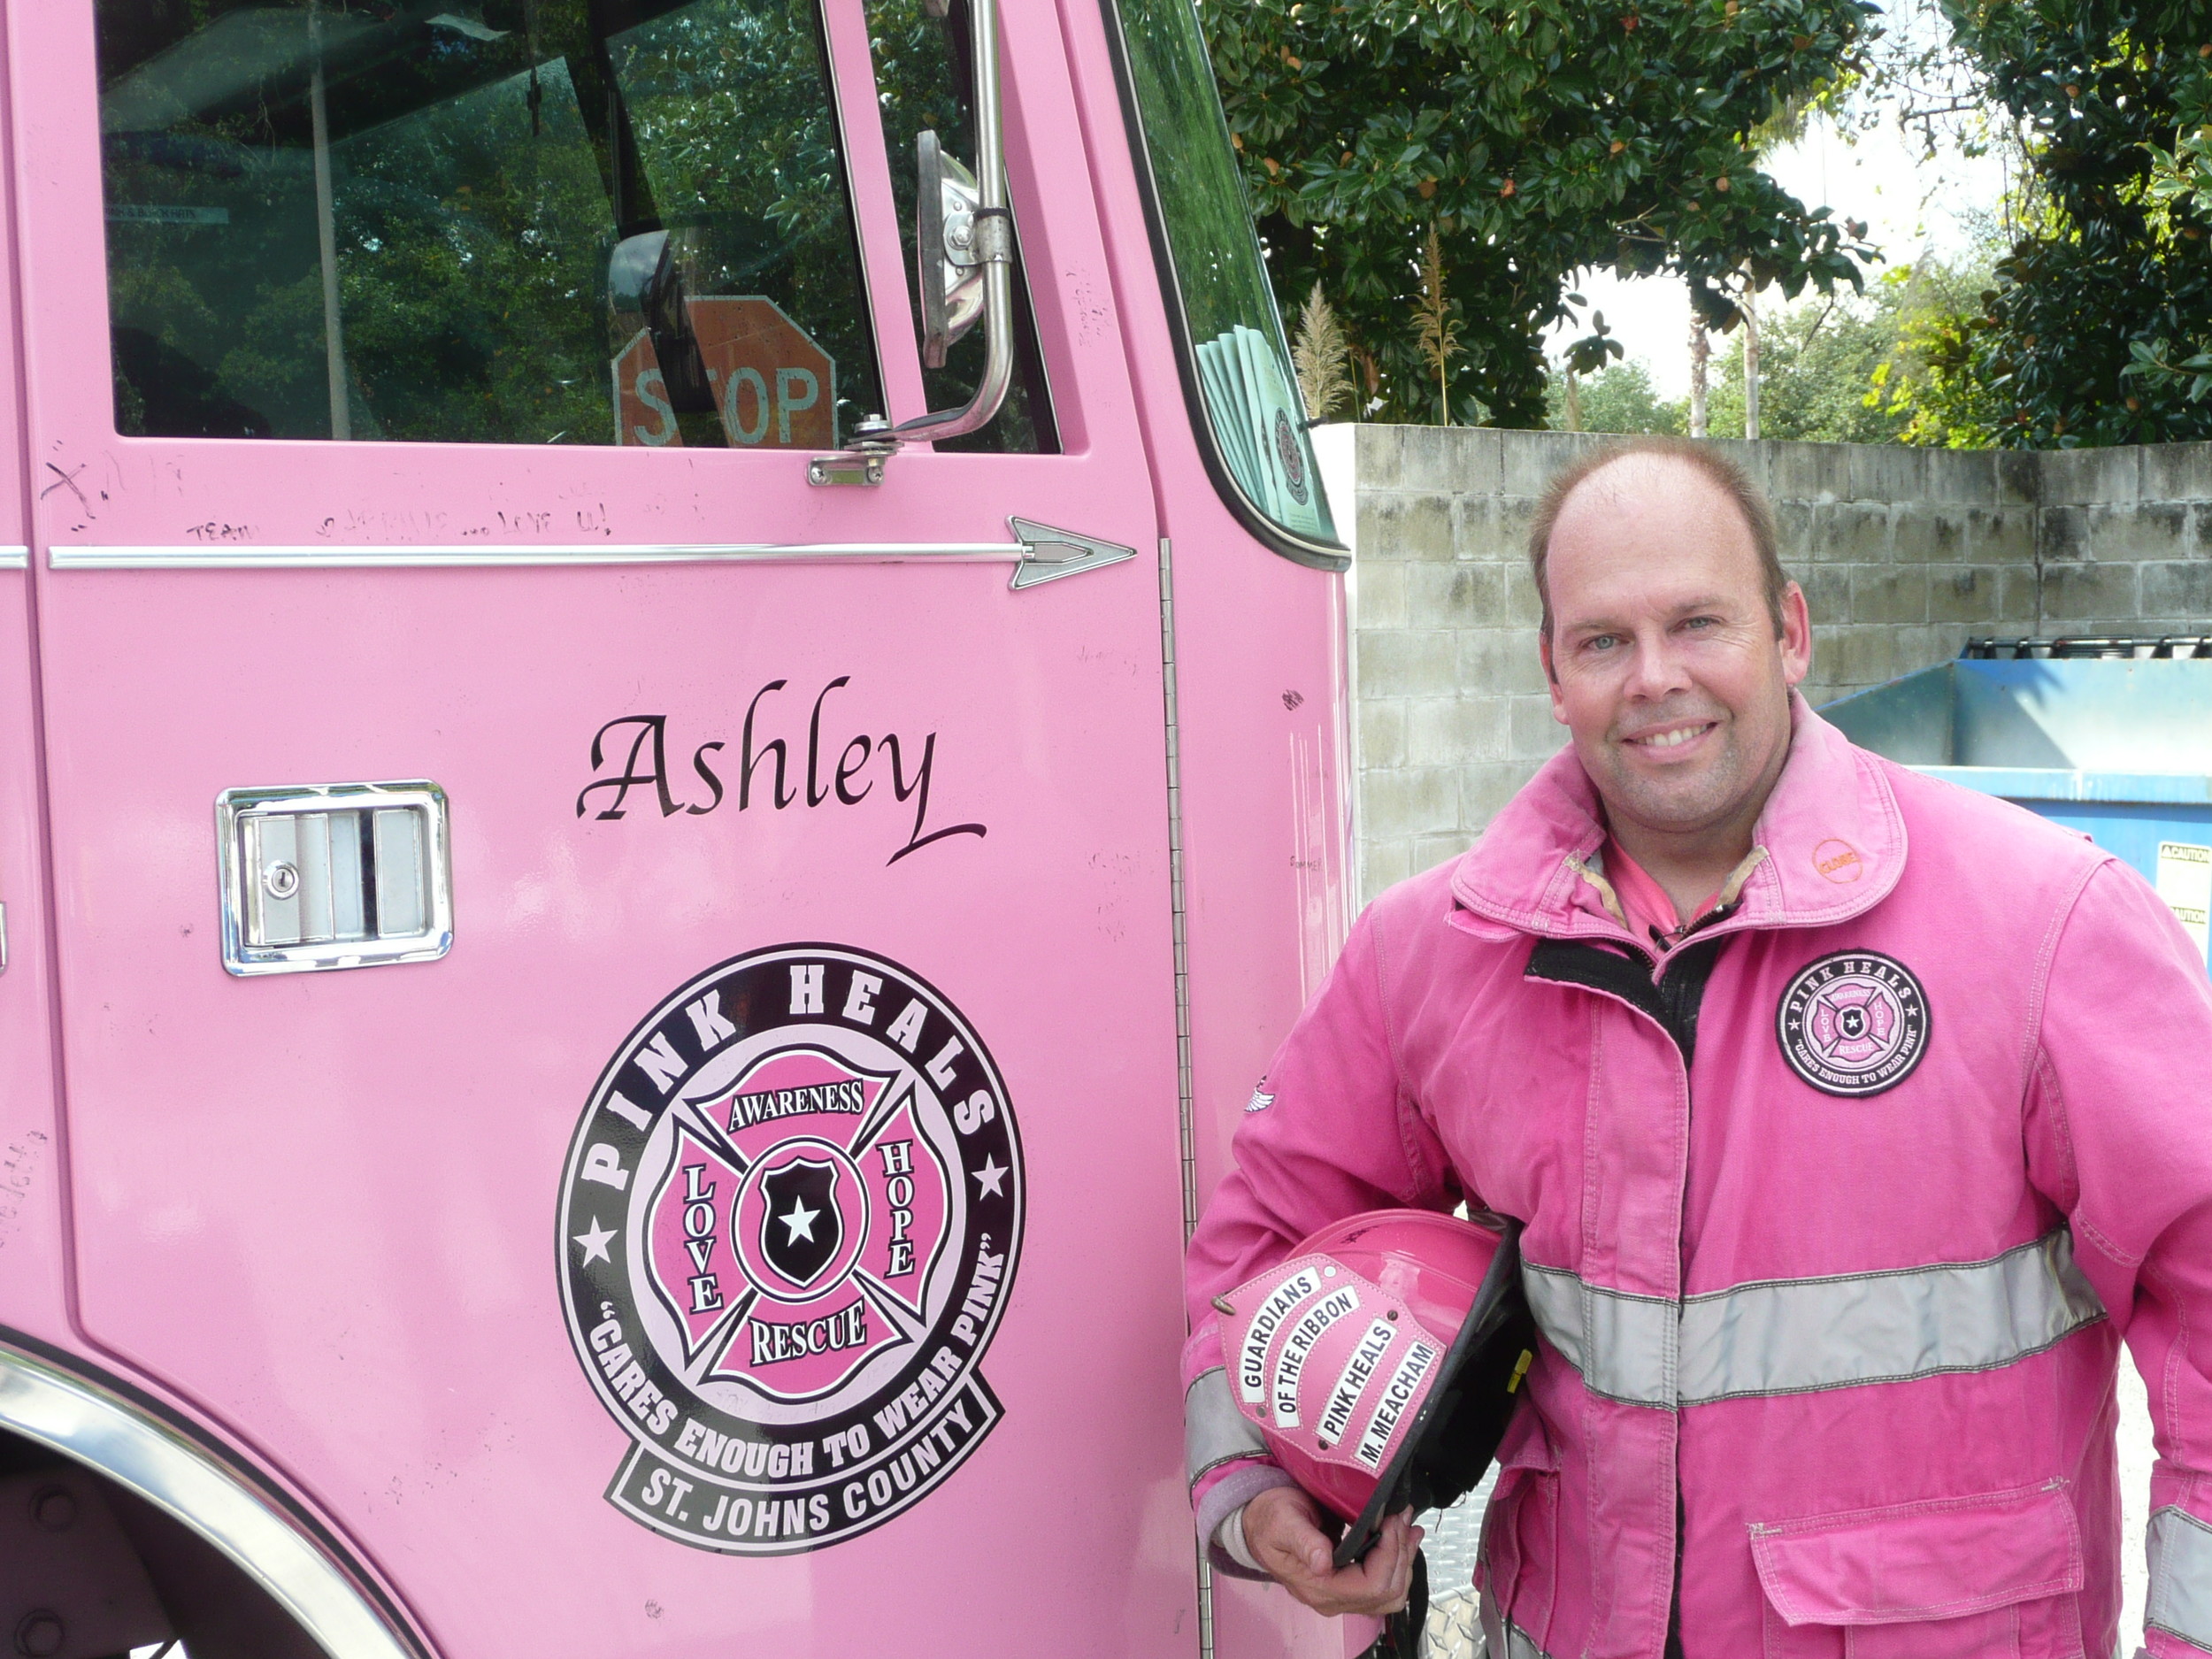 Lt. Mike Meacham  with Pink Heals St. Johns County Chapter and Ashley the fire truck